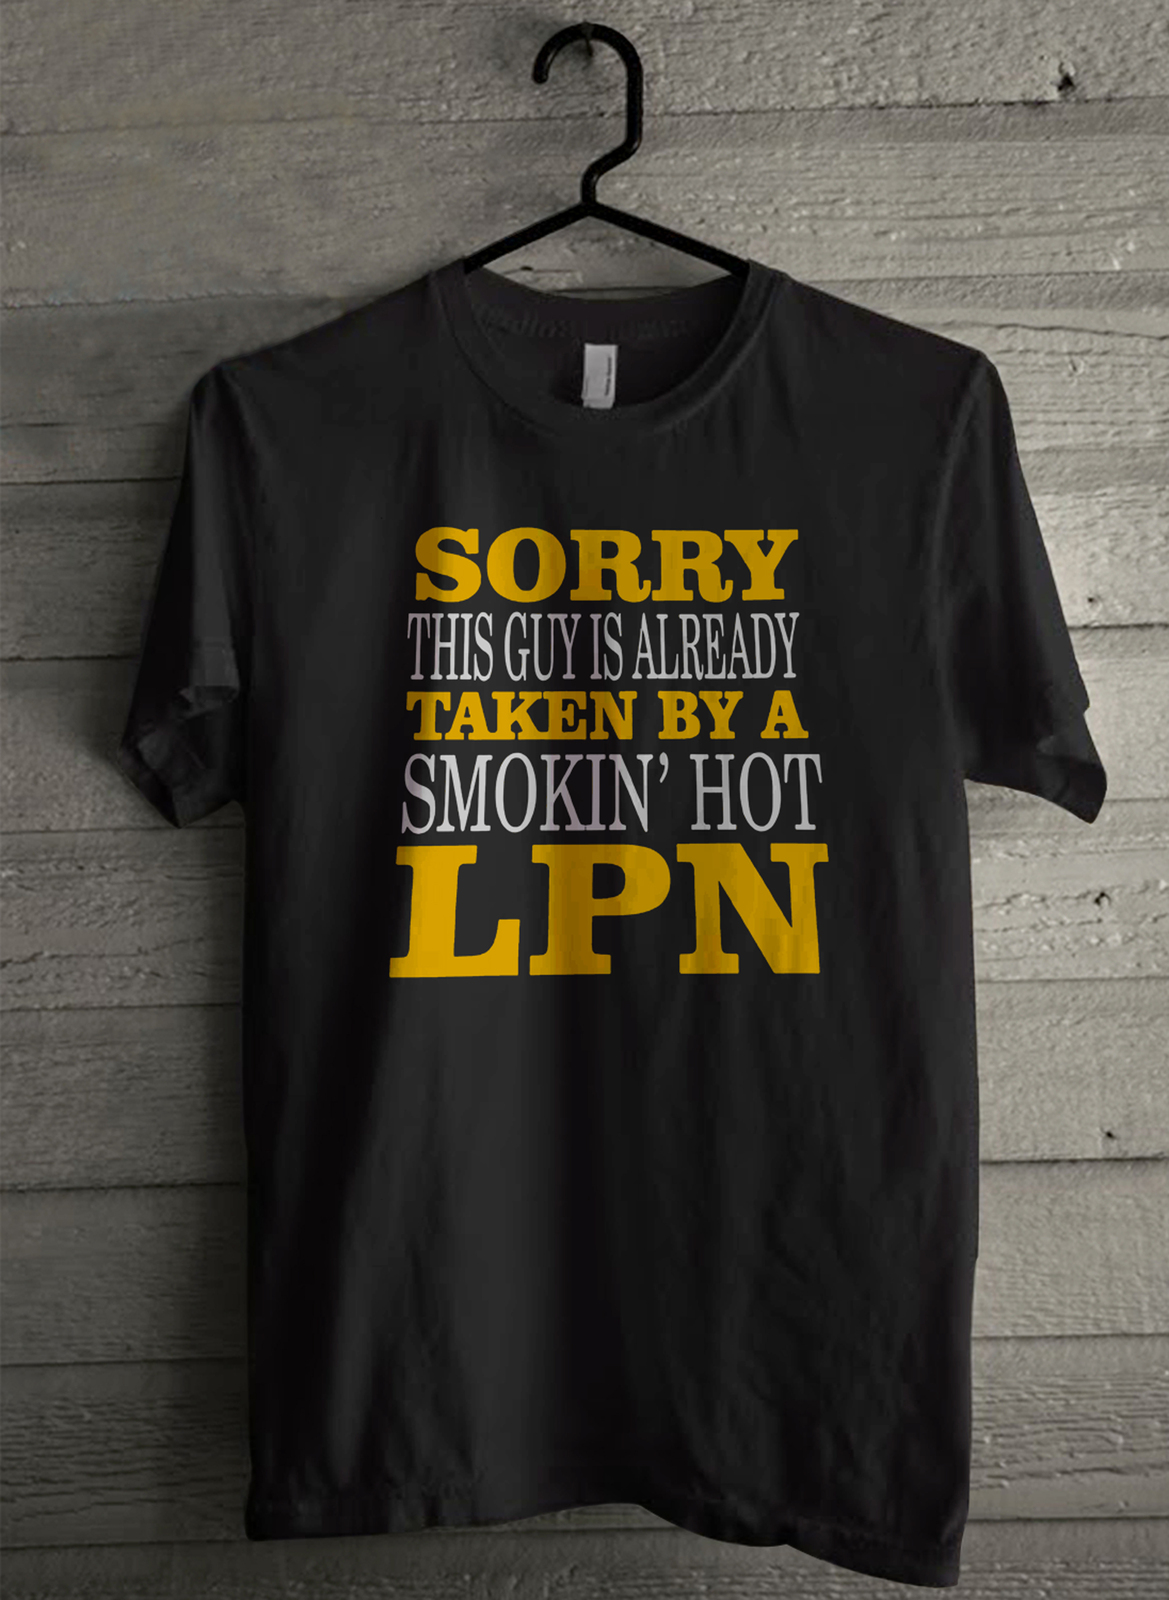 Sorry this guy is alread taken by a smokin hot Men's T-Shirt - Custom (4160) - £15.52 GBP - £17.71 GBP